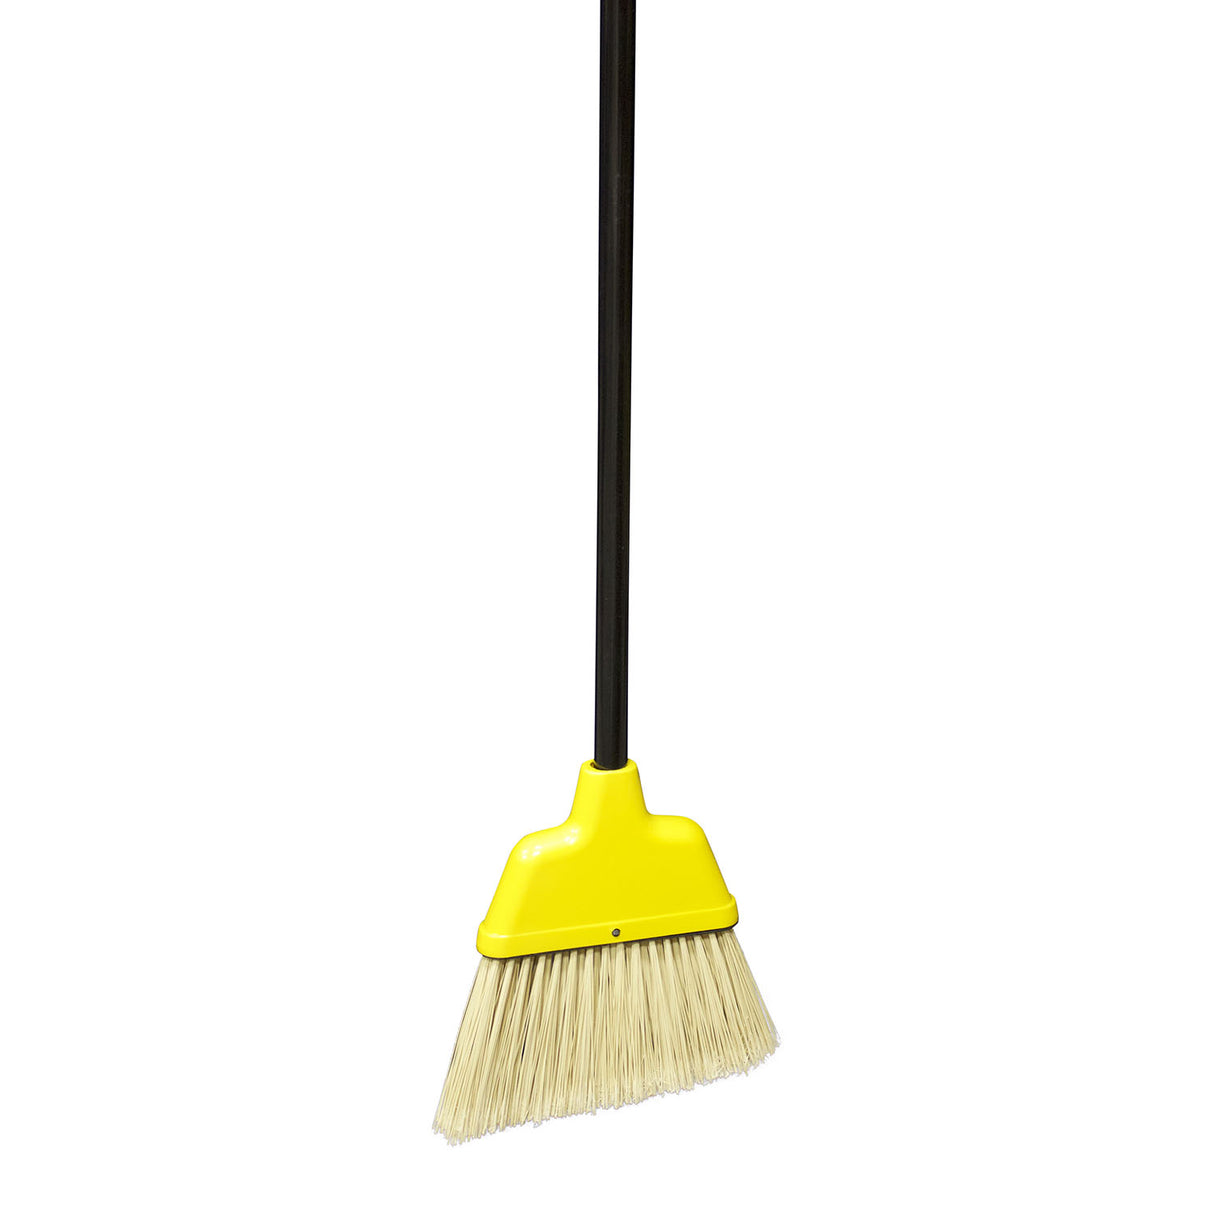 Small Angle Broom 12-Pack/Case